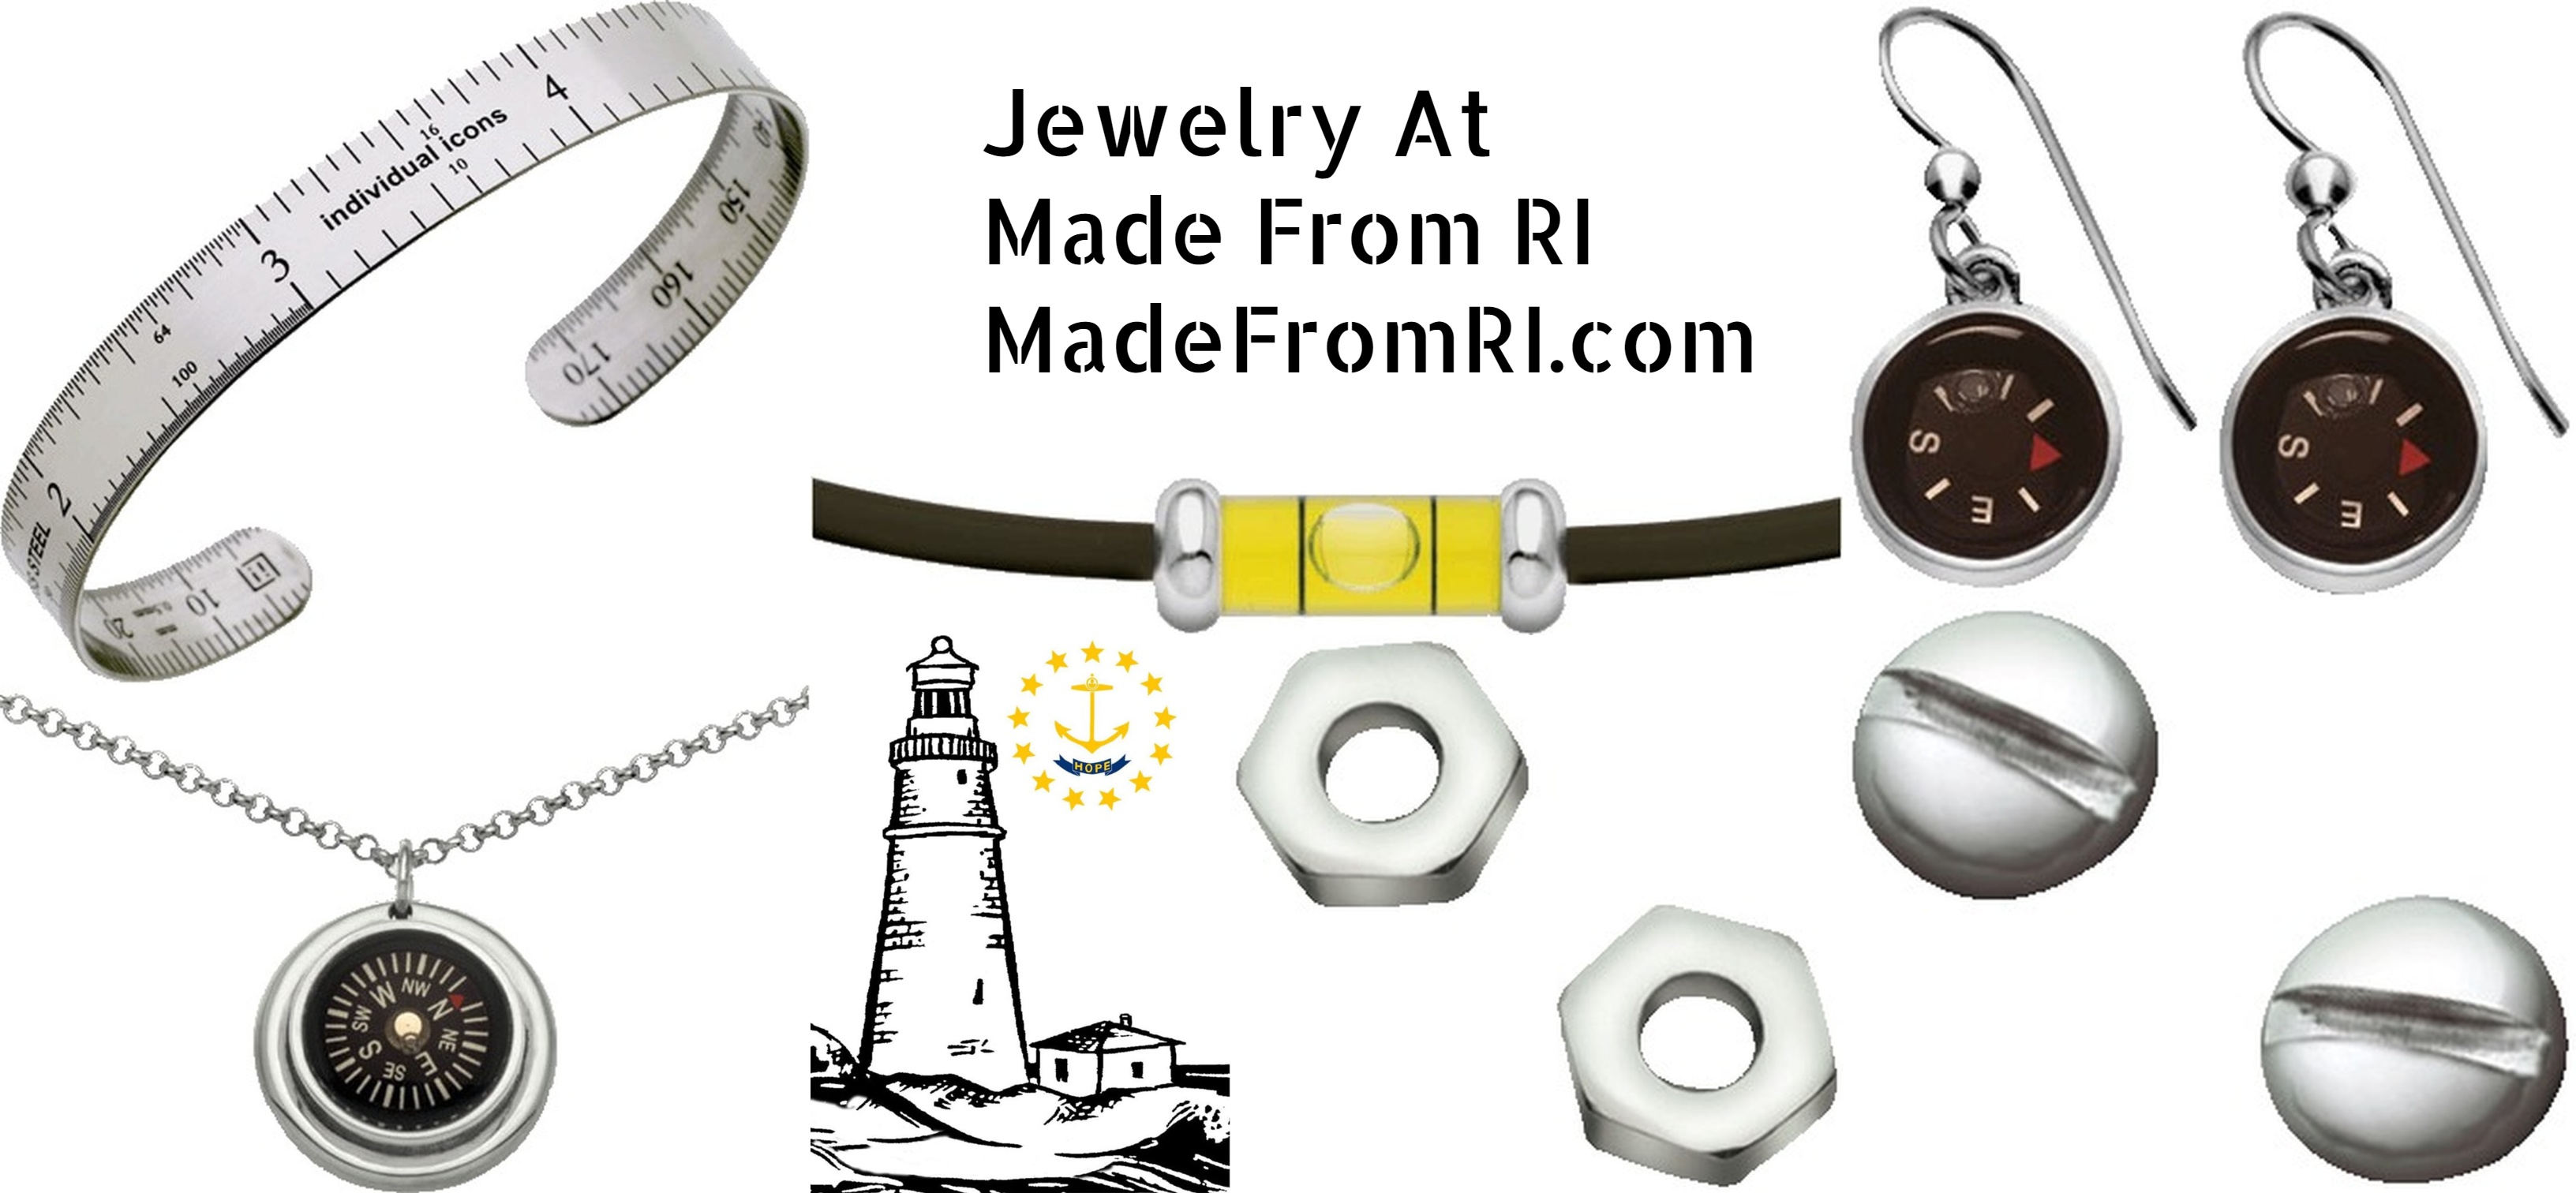 Made From RI Jewelry